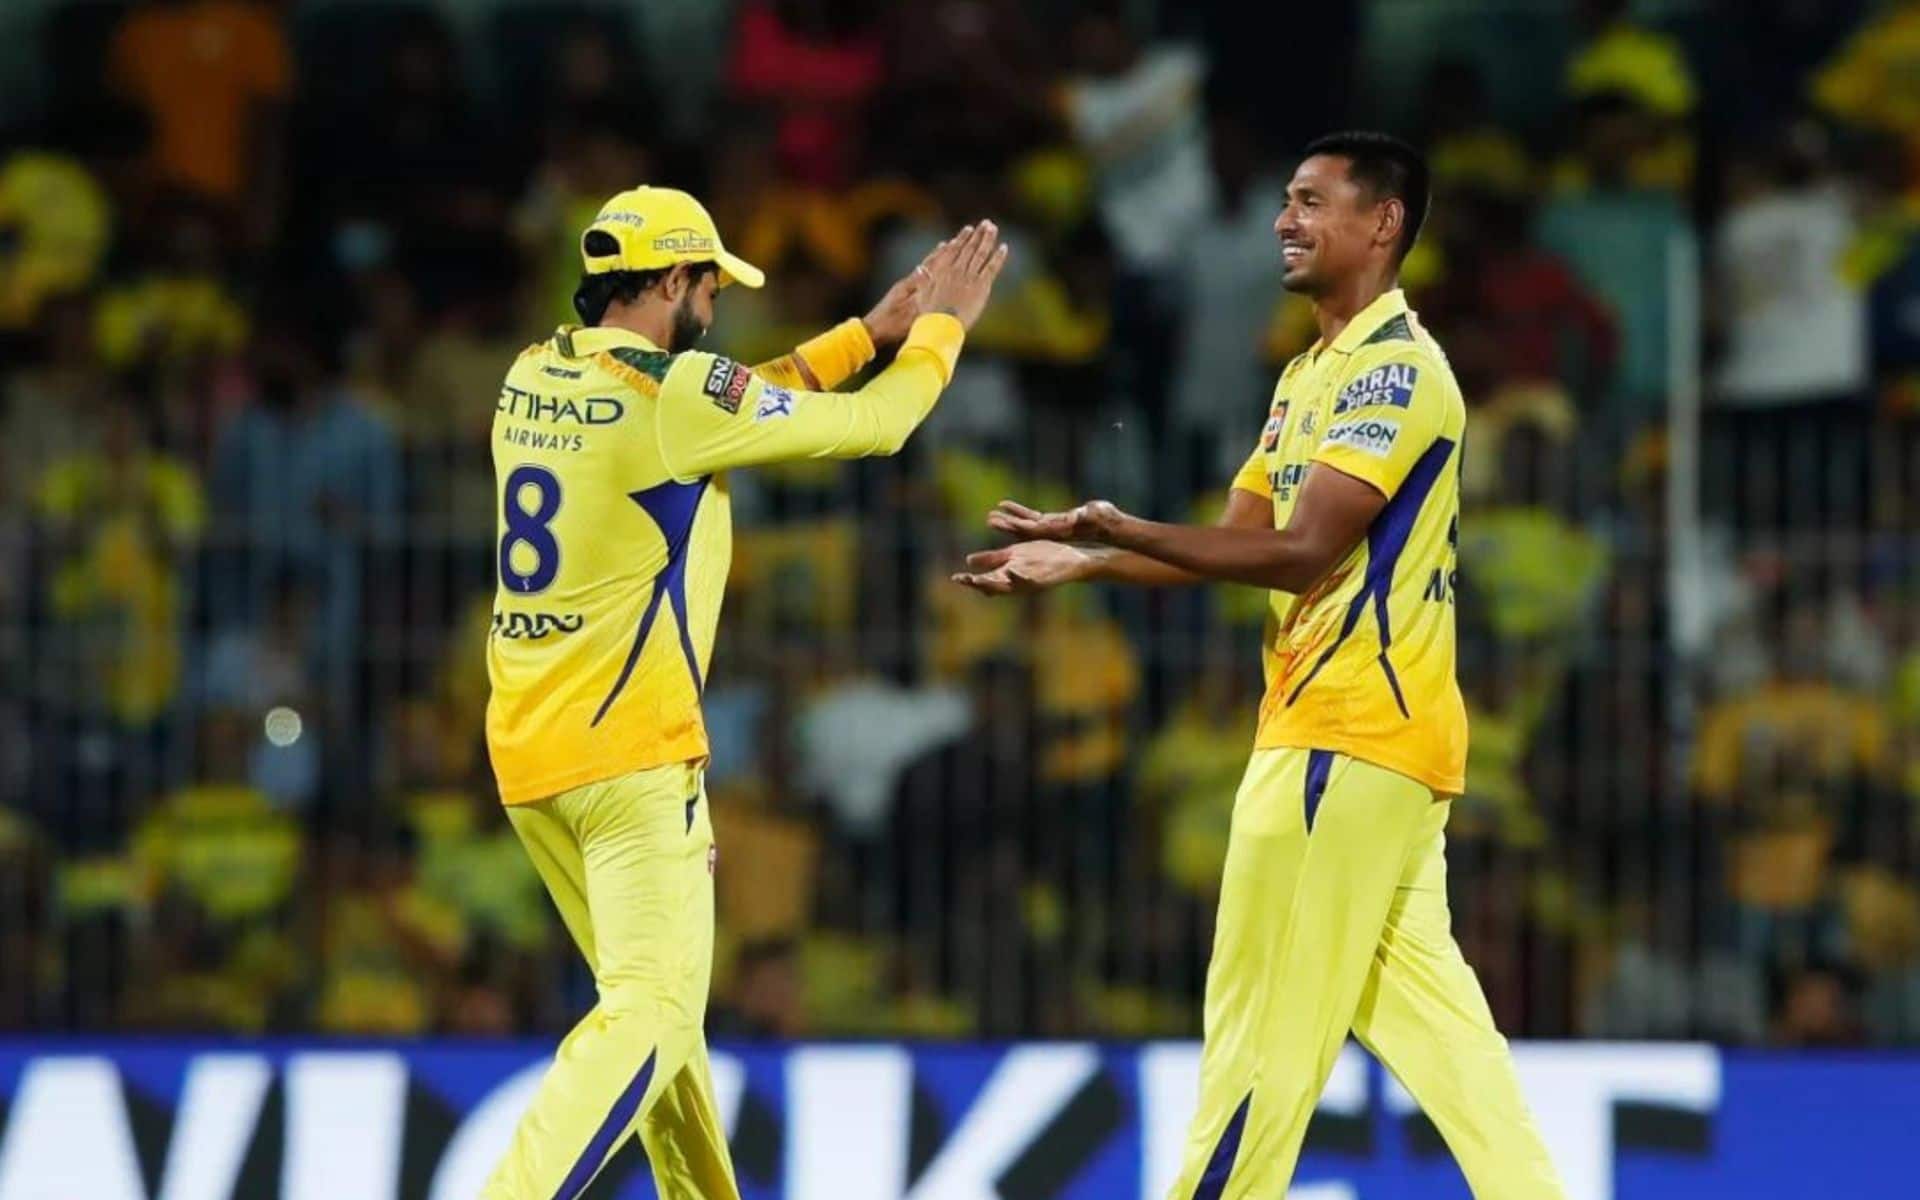 CSK will miss the services of Mustafizur in their next game (x.com)